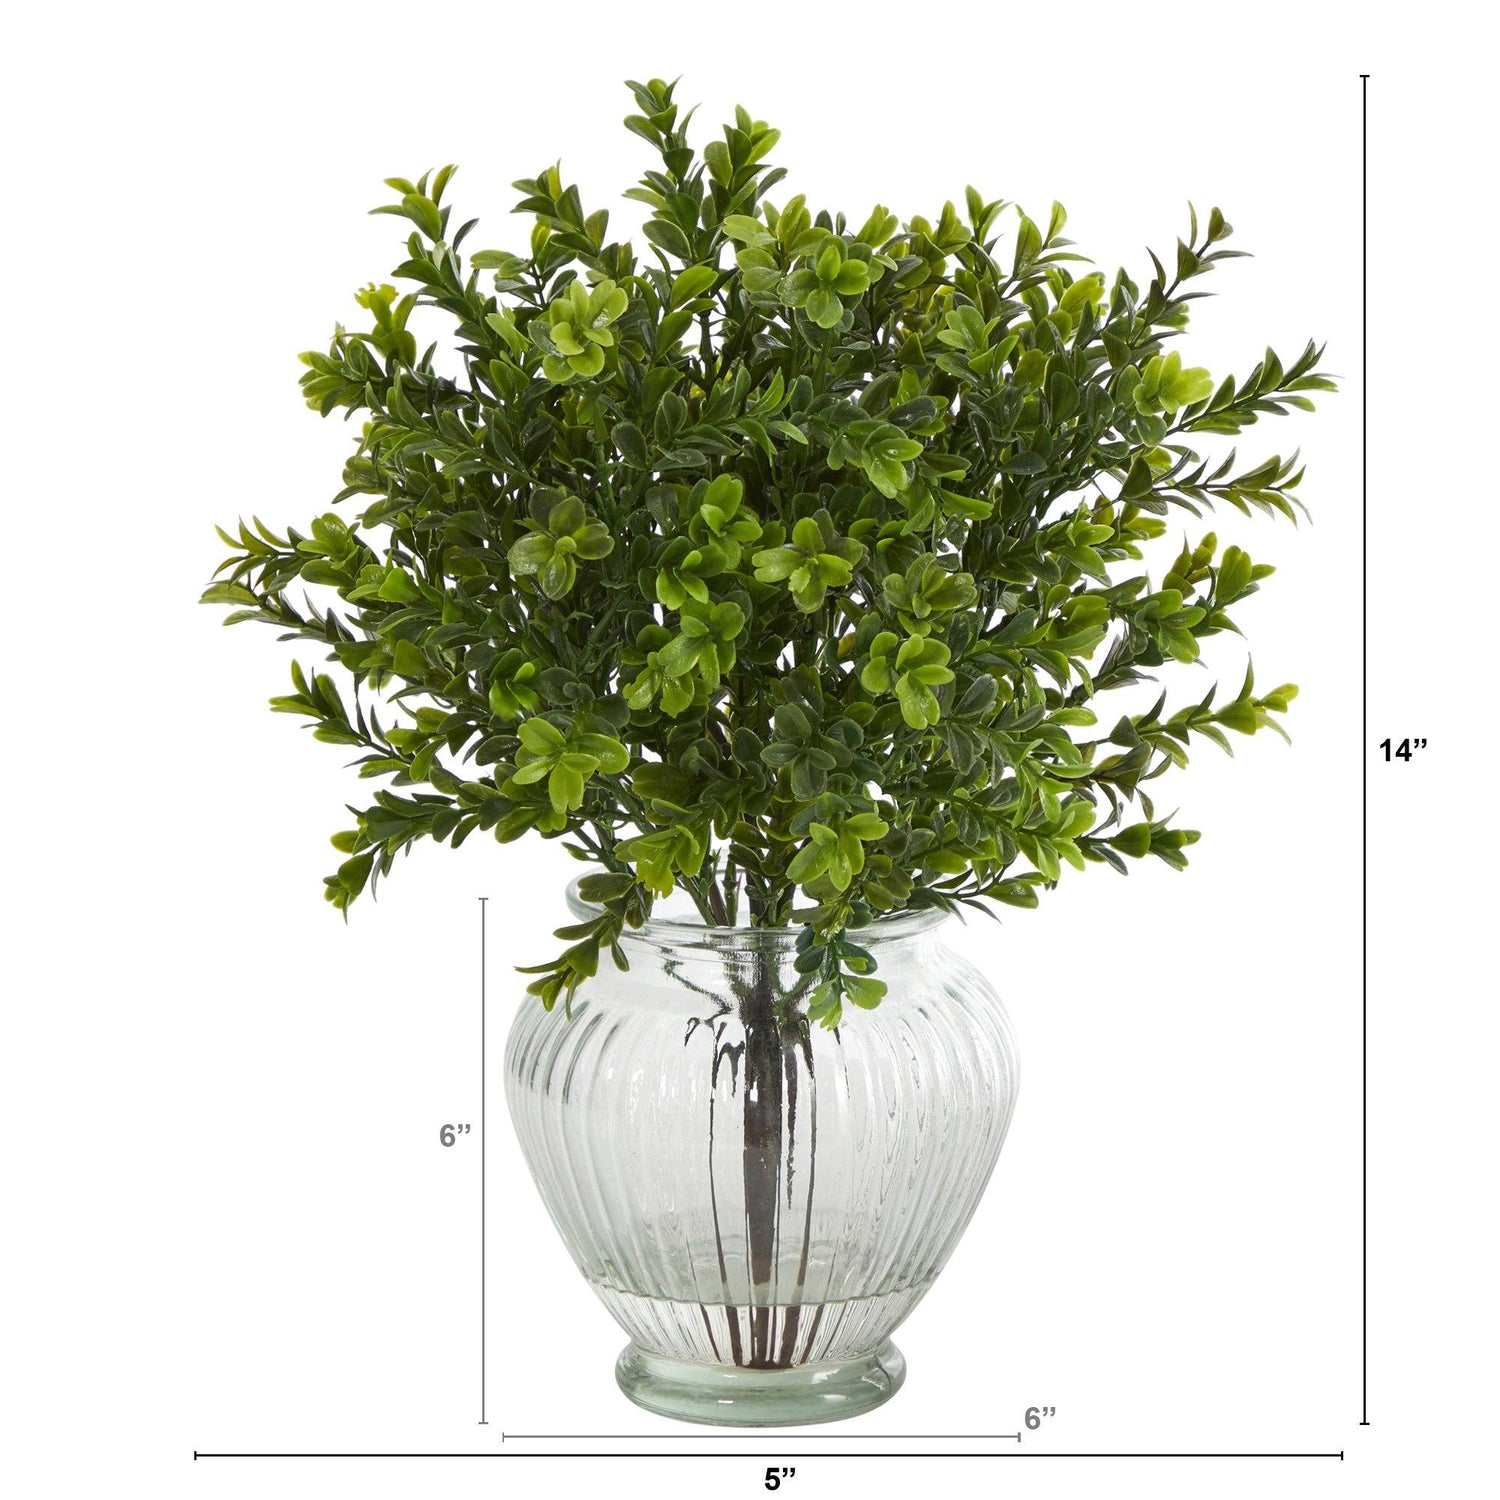 14” Boxwood Artificial Plant in Glass Planter (Indoor/Outdoor)